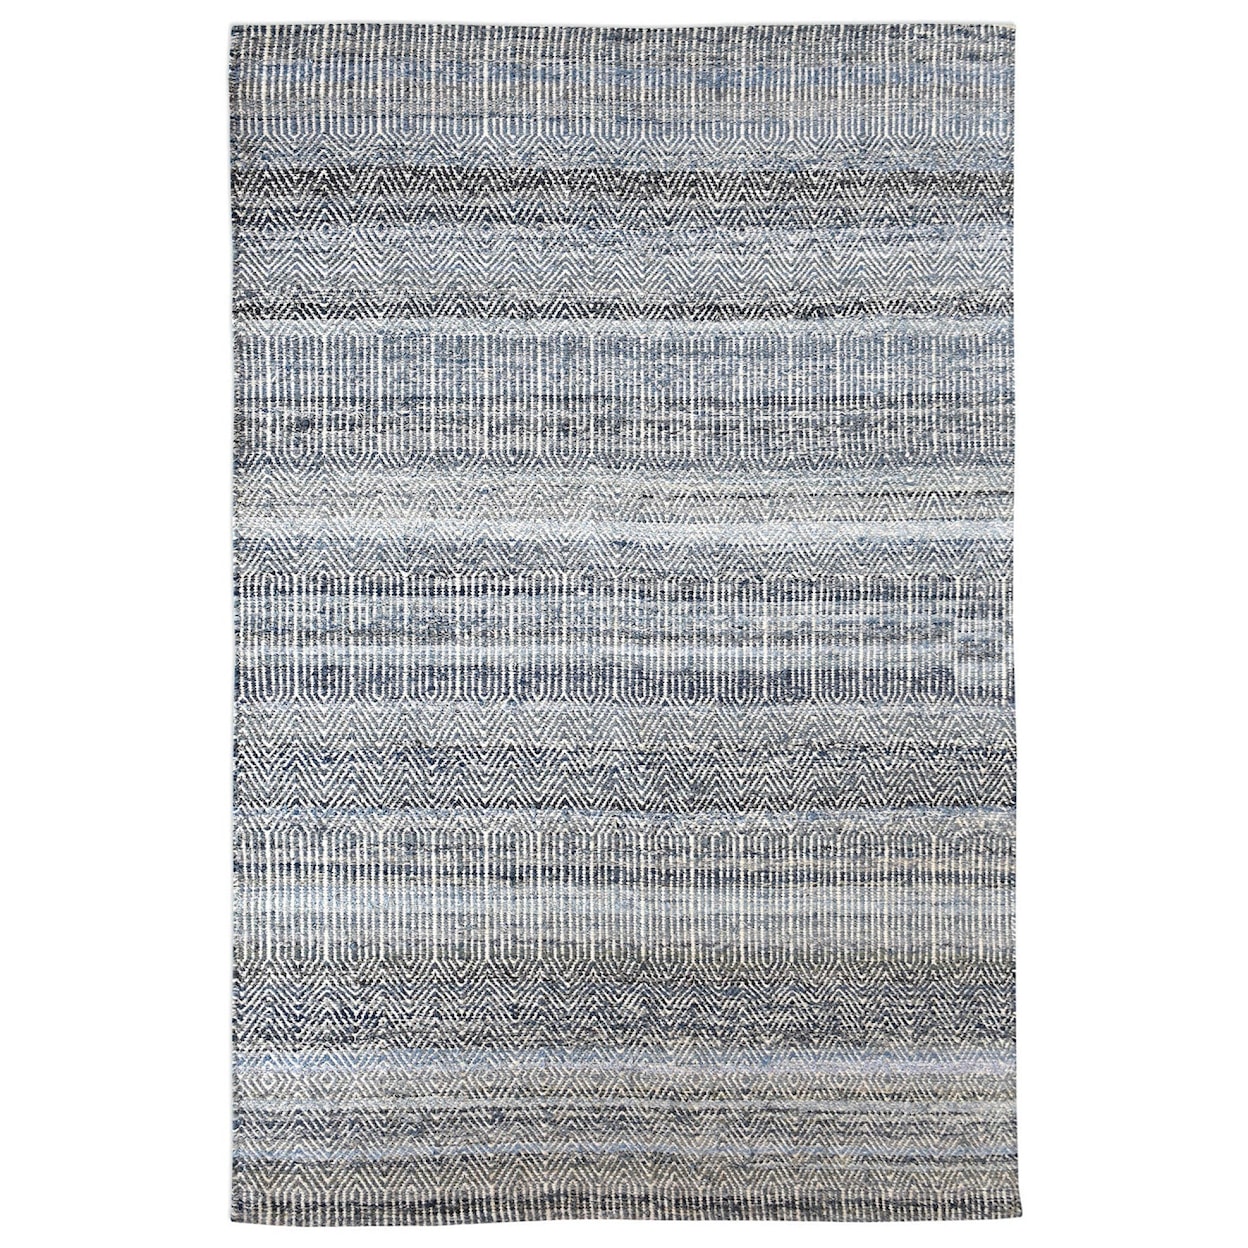 Uttermost Rugs Bolivia Blue 9 x 12 Rug